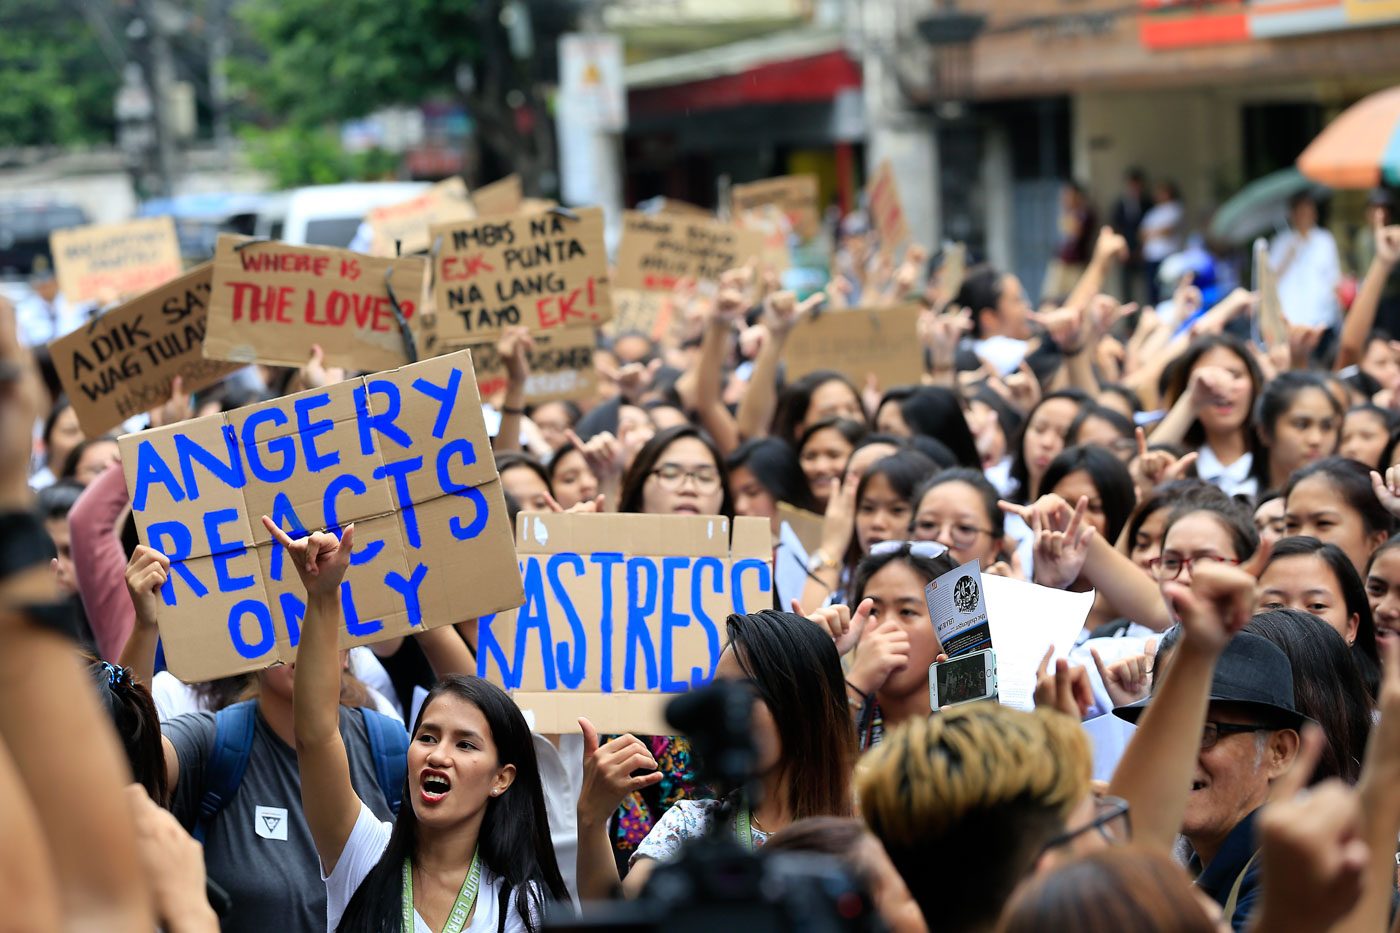 WEEK BEFORE SONA. Students of the St. Scholastica's College along with various activist groups rally outside the college in Manila on July 16, 2017 against the thousands of extra judicial killings involved in the drug war of President Rodrigo Duterte, a week before his 2nd State of the Nation Address. Photo by Ben Nabong/Rappler 